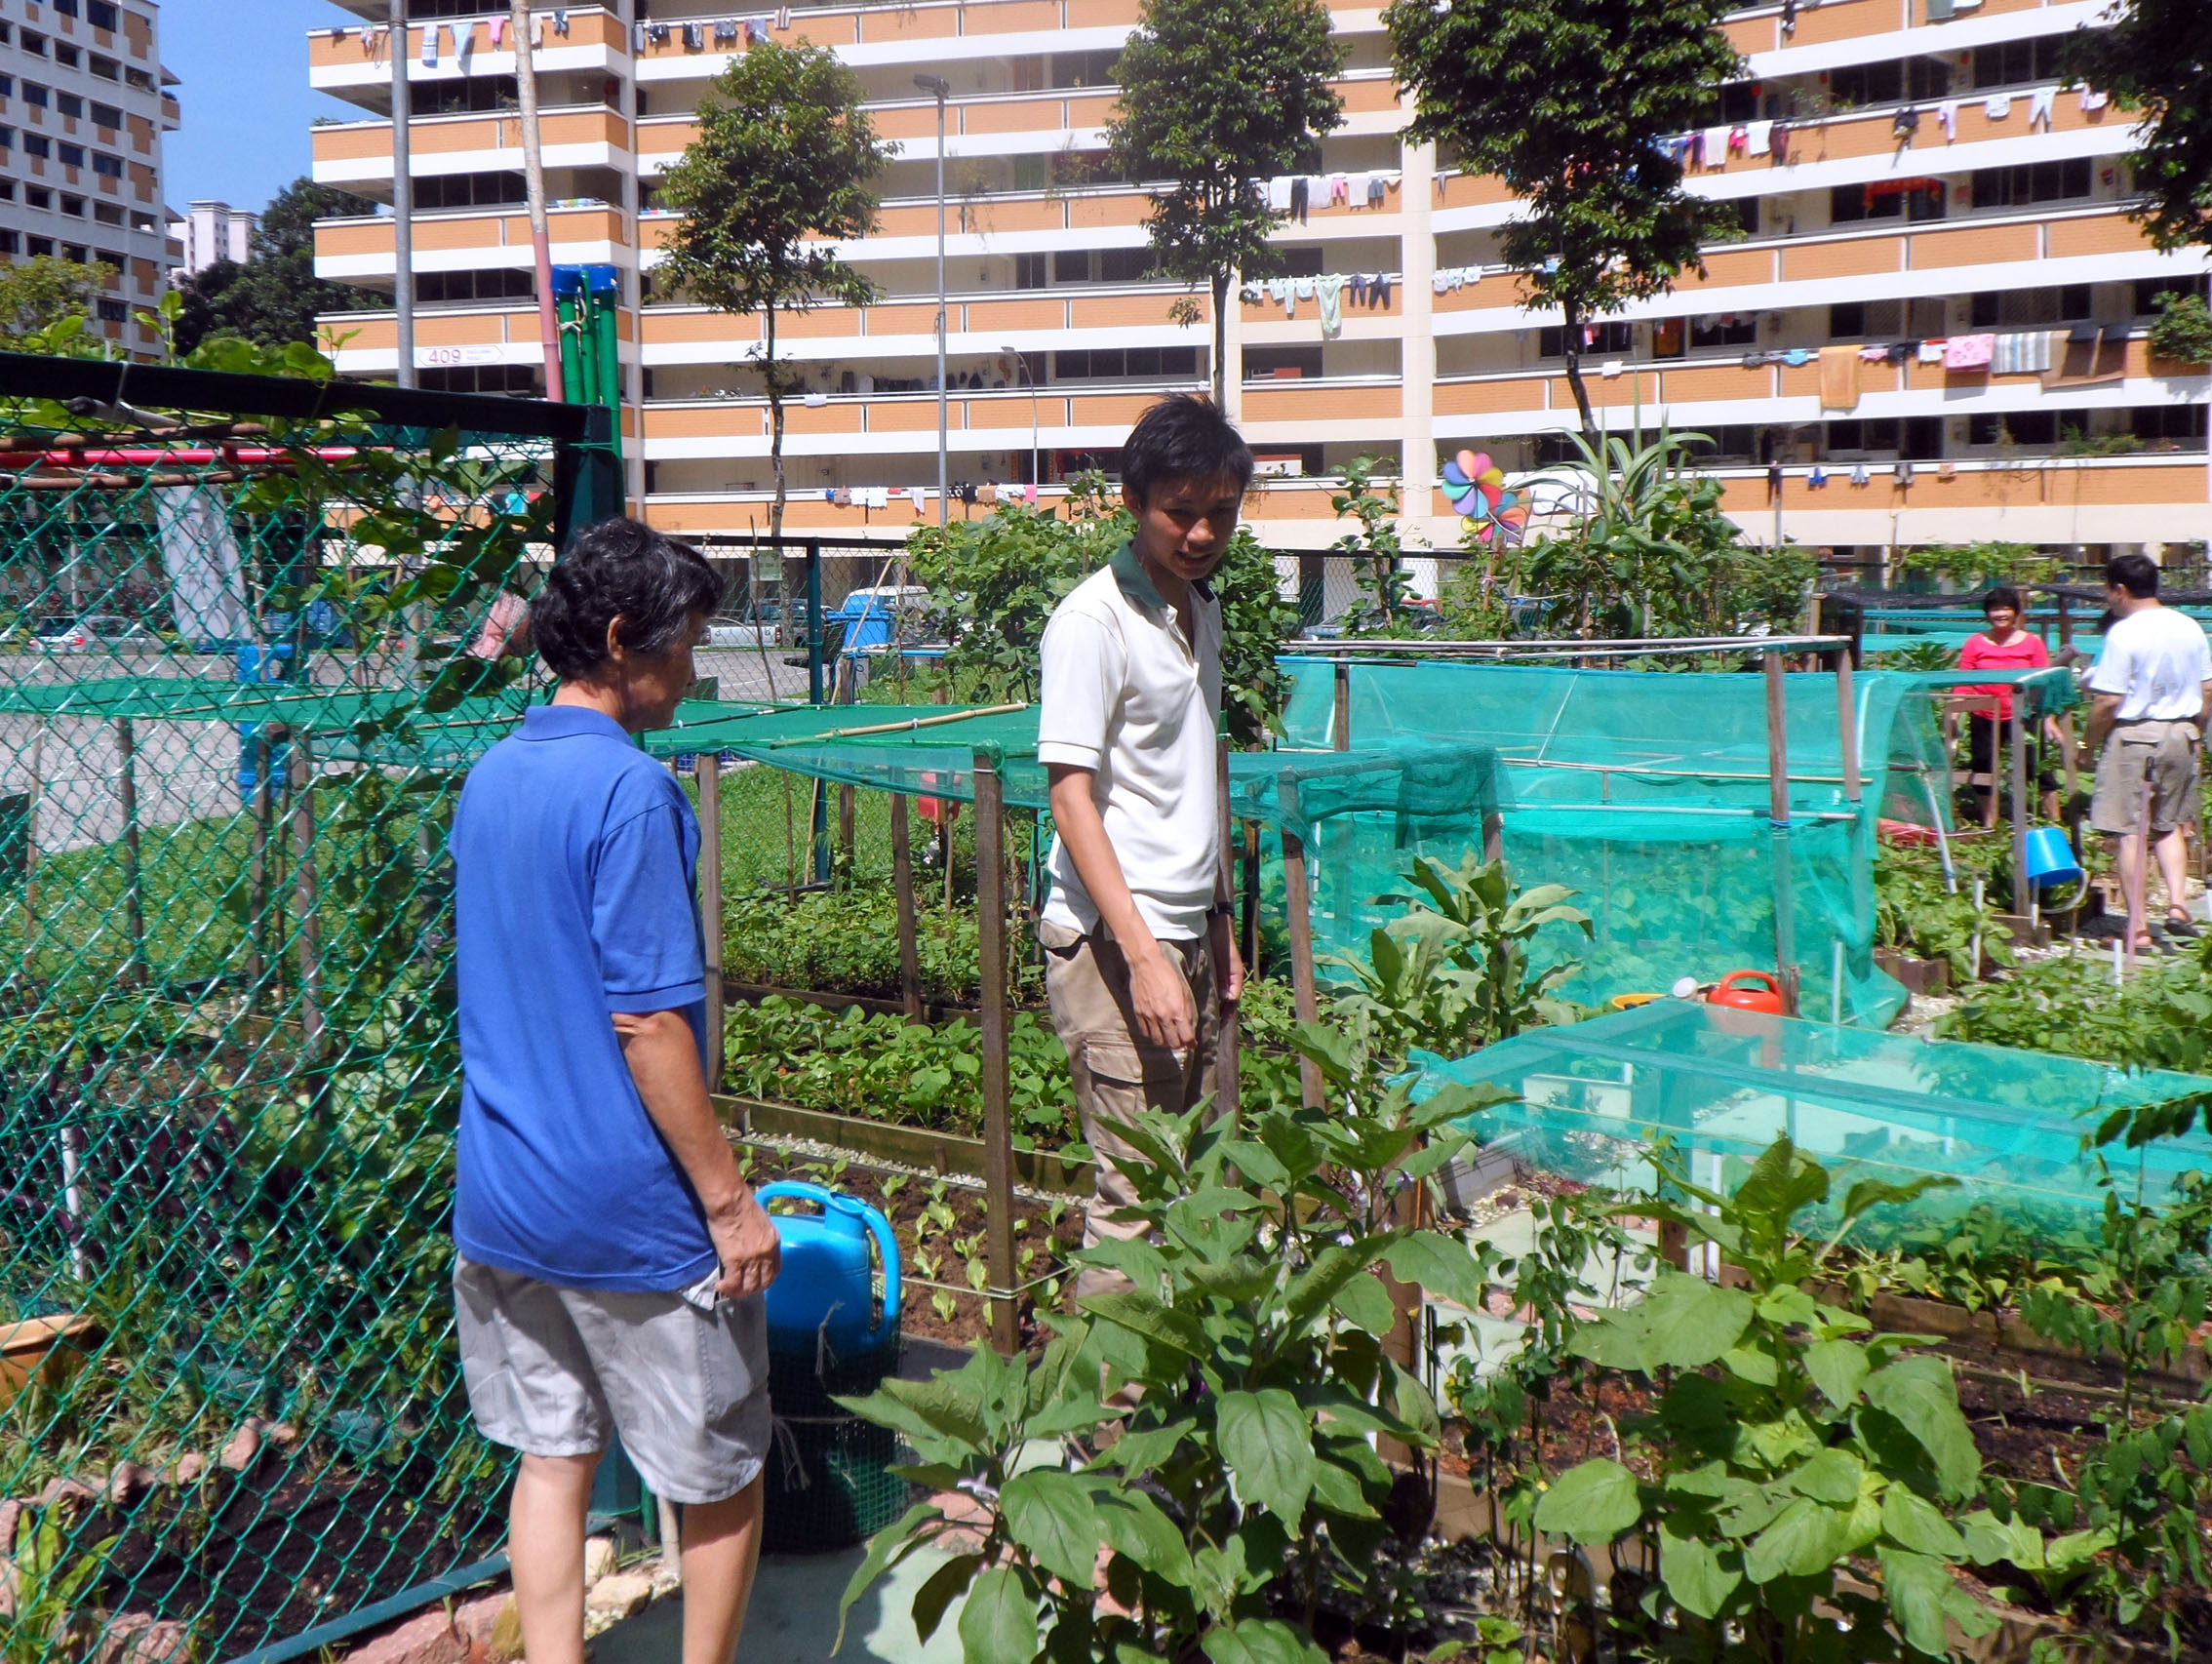 Promoting Community Gardening Is His Passion